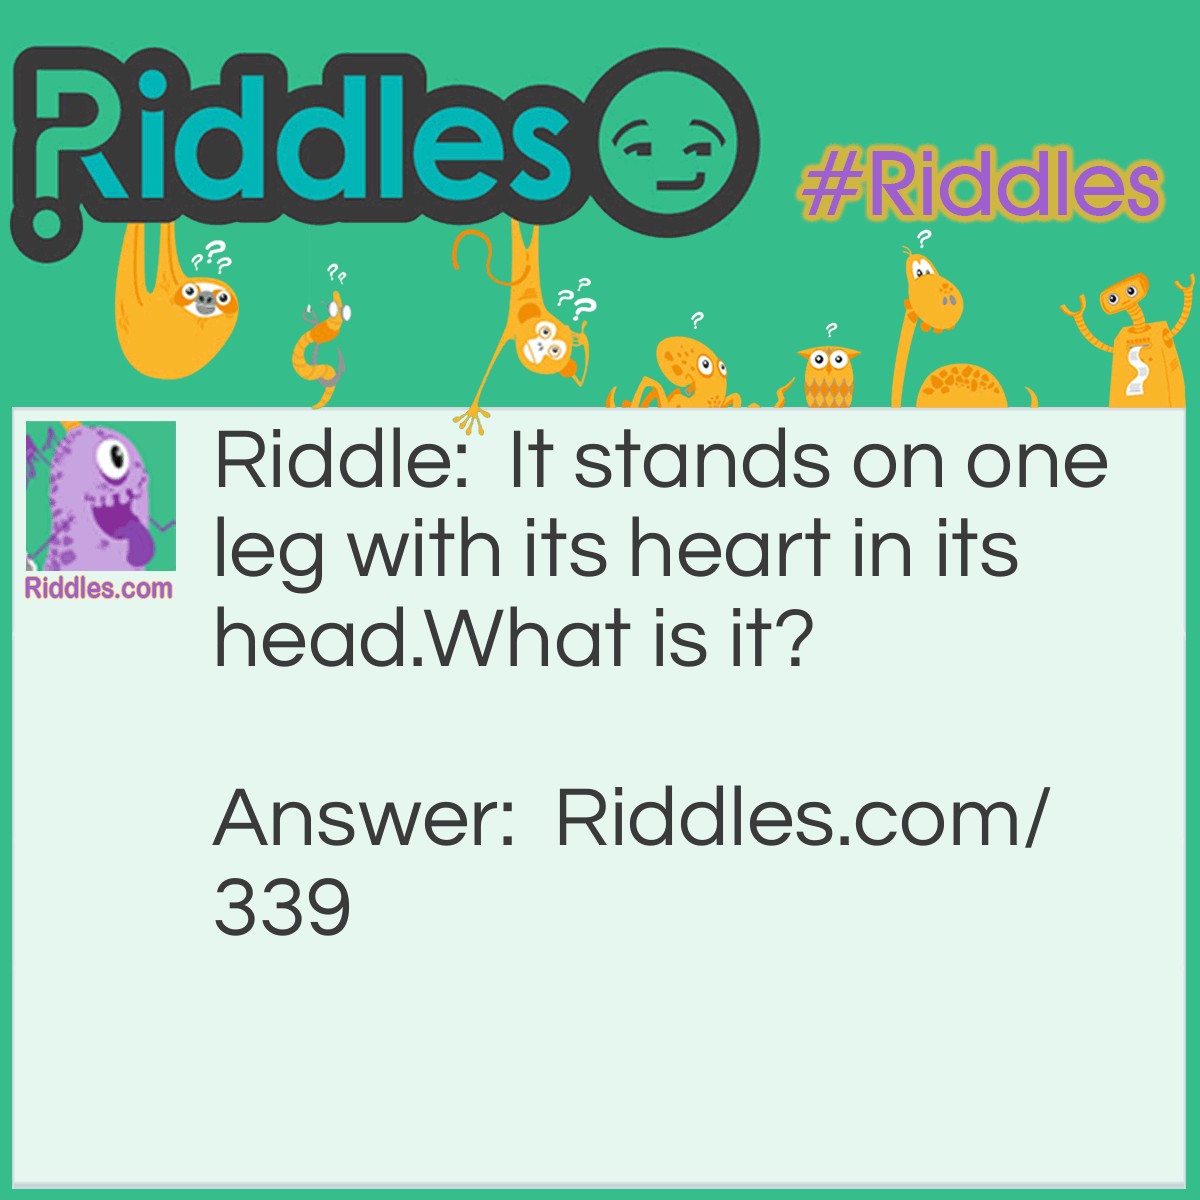 Riddle: It stands on one leg with its heart in its head. What is it? Answer: A cabbage.